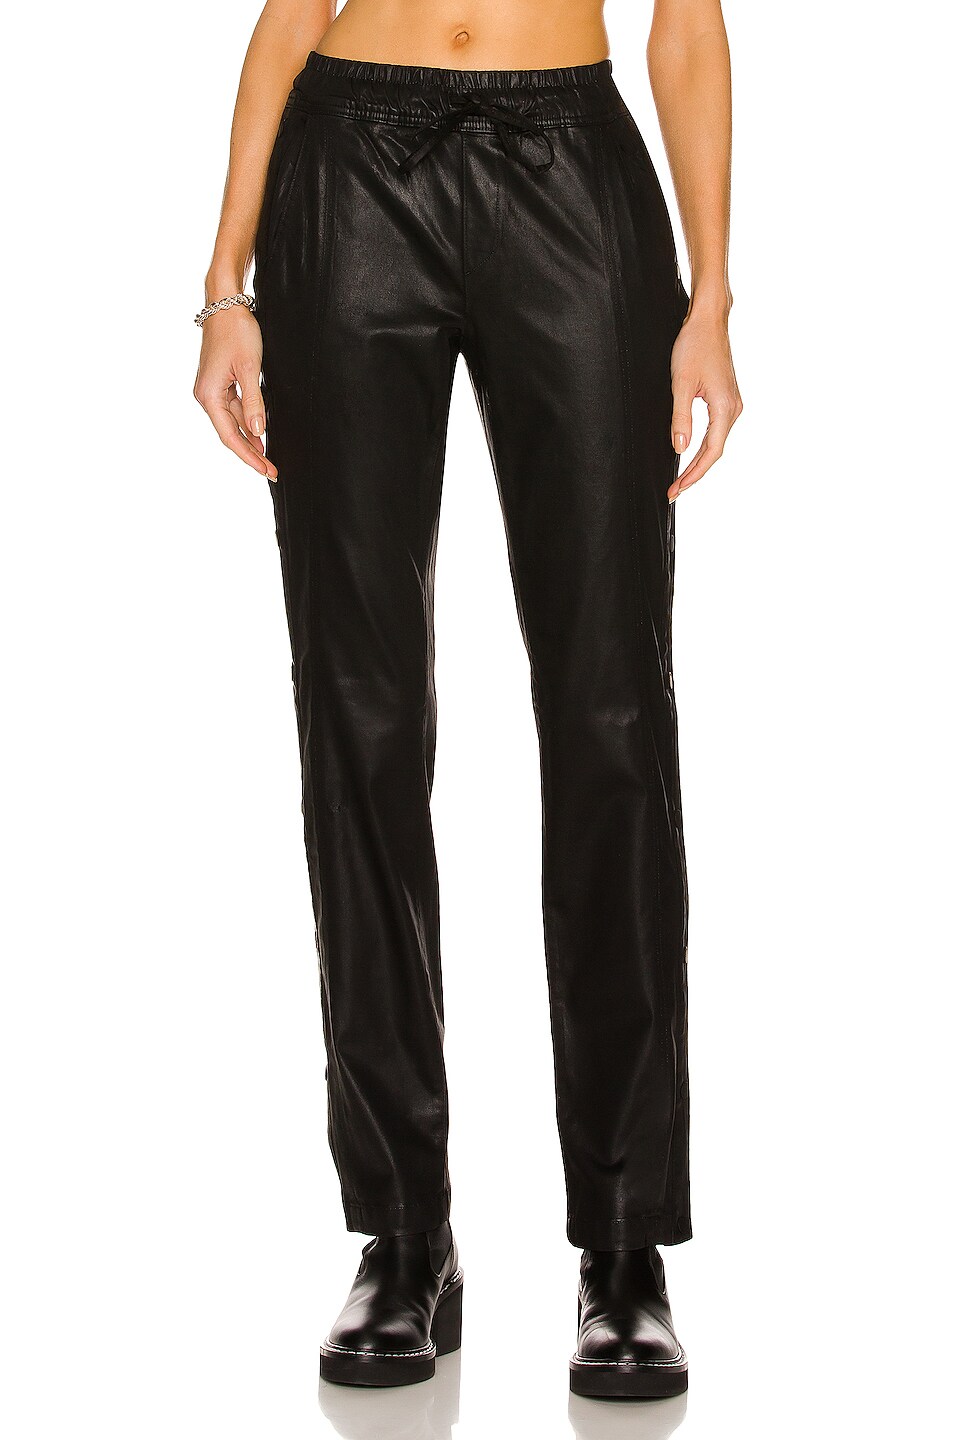 Image 1 of COTTON CITIZEN The London Snap Pant in Black Coated